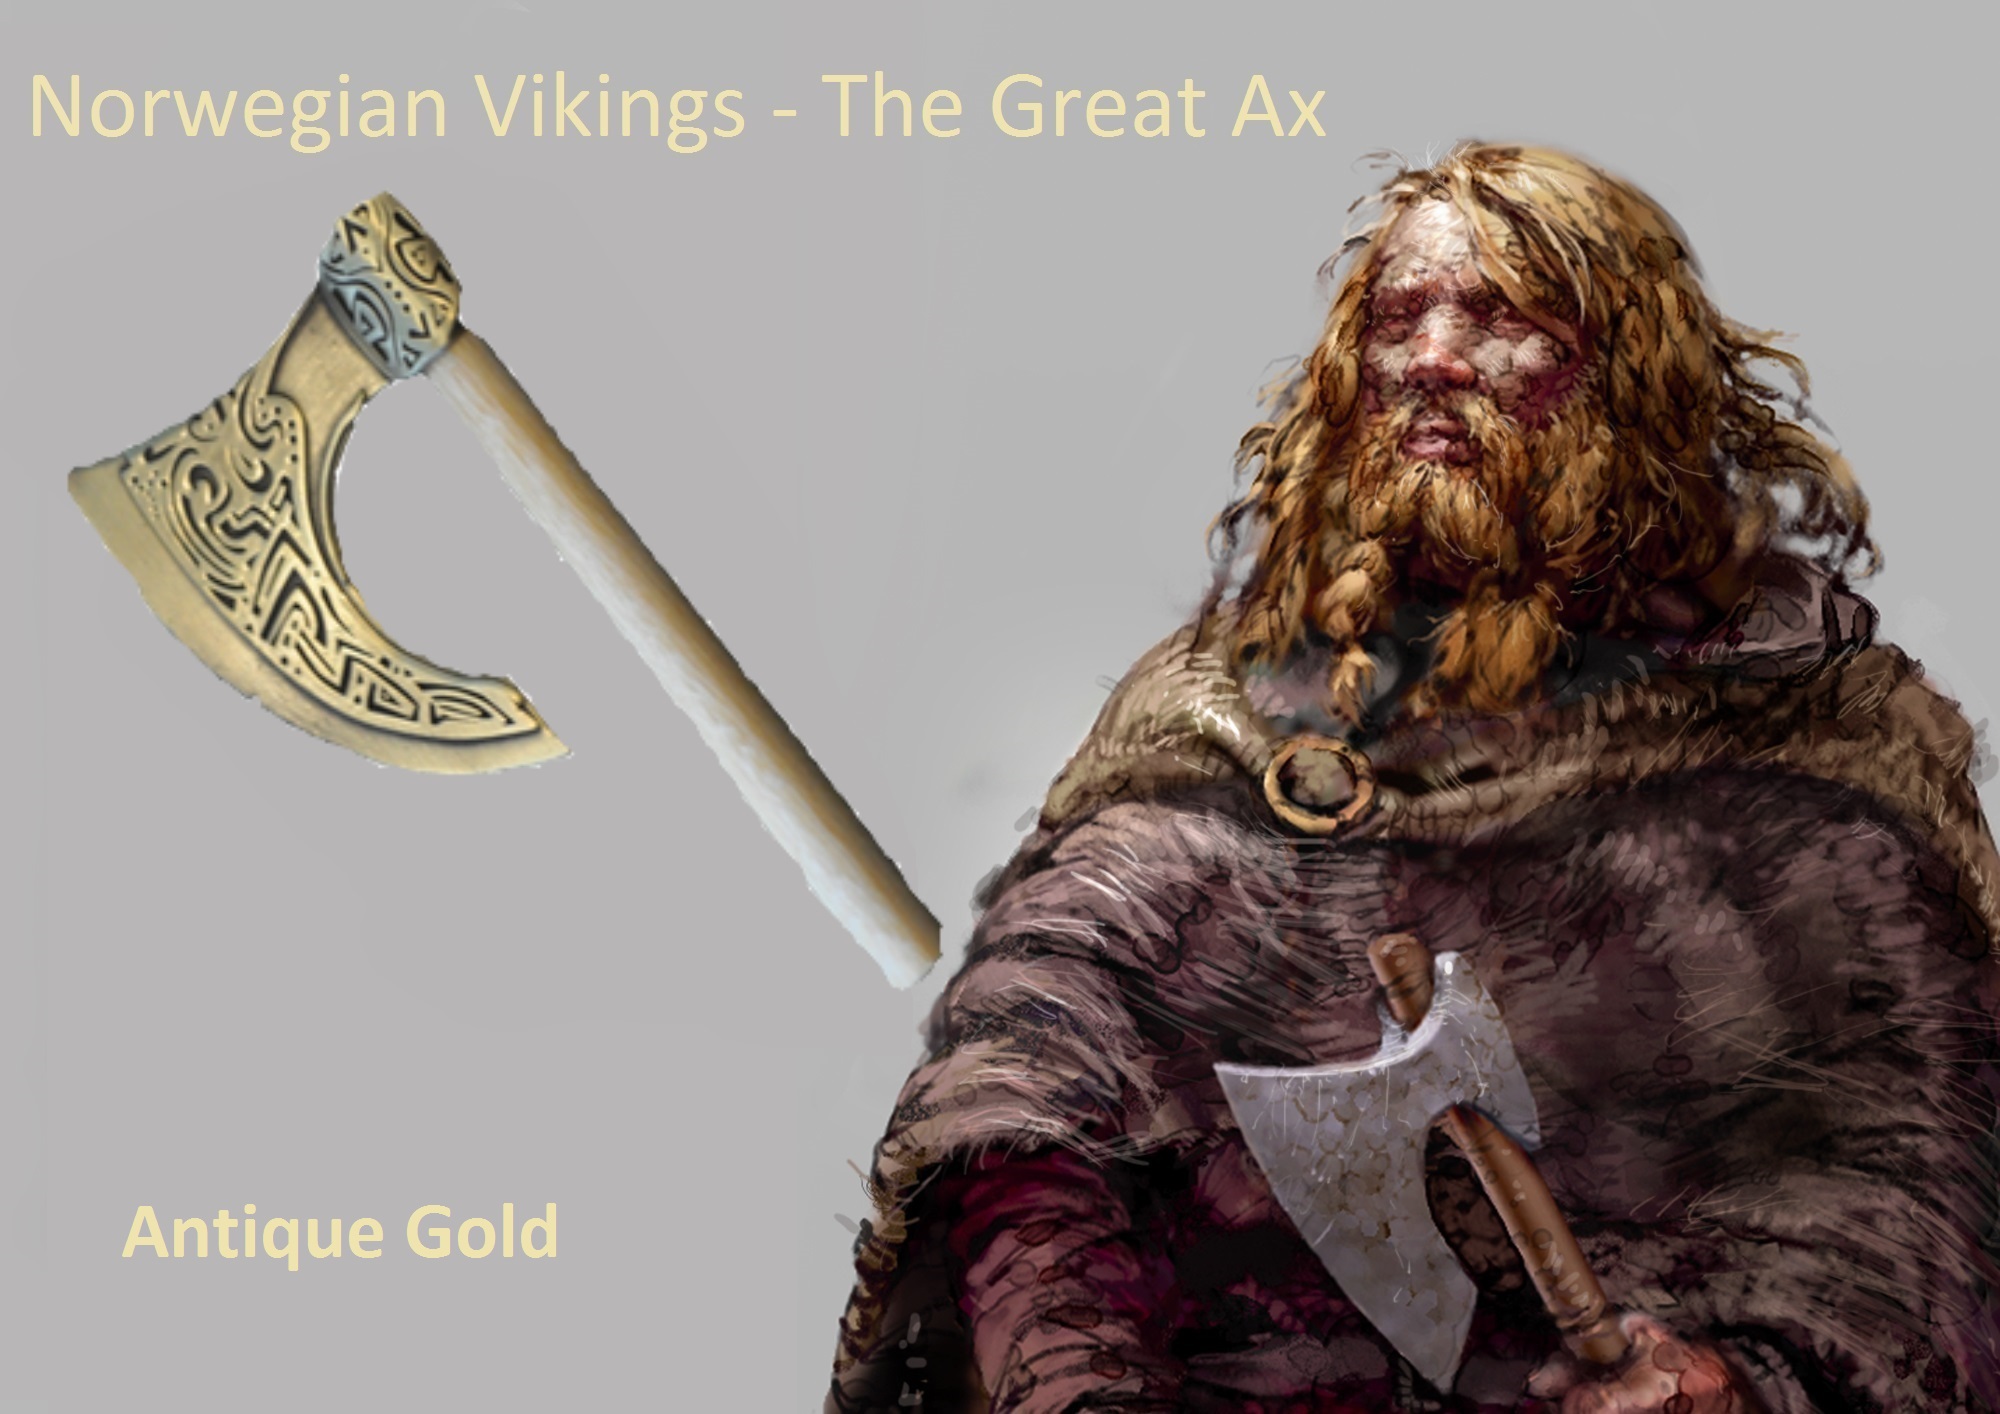 The Great Ax - Antique Gold.jpg